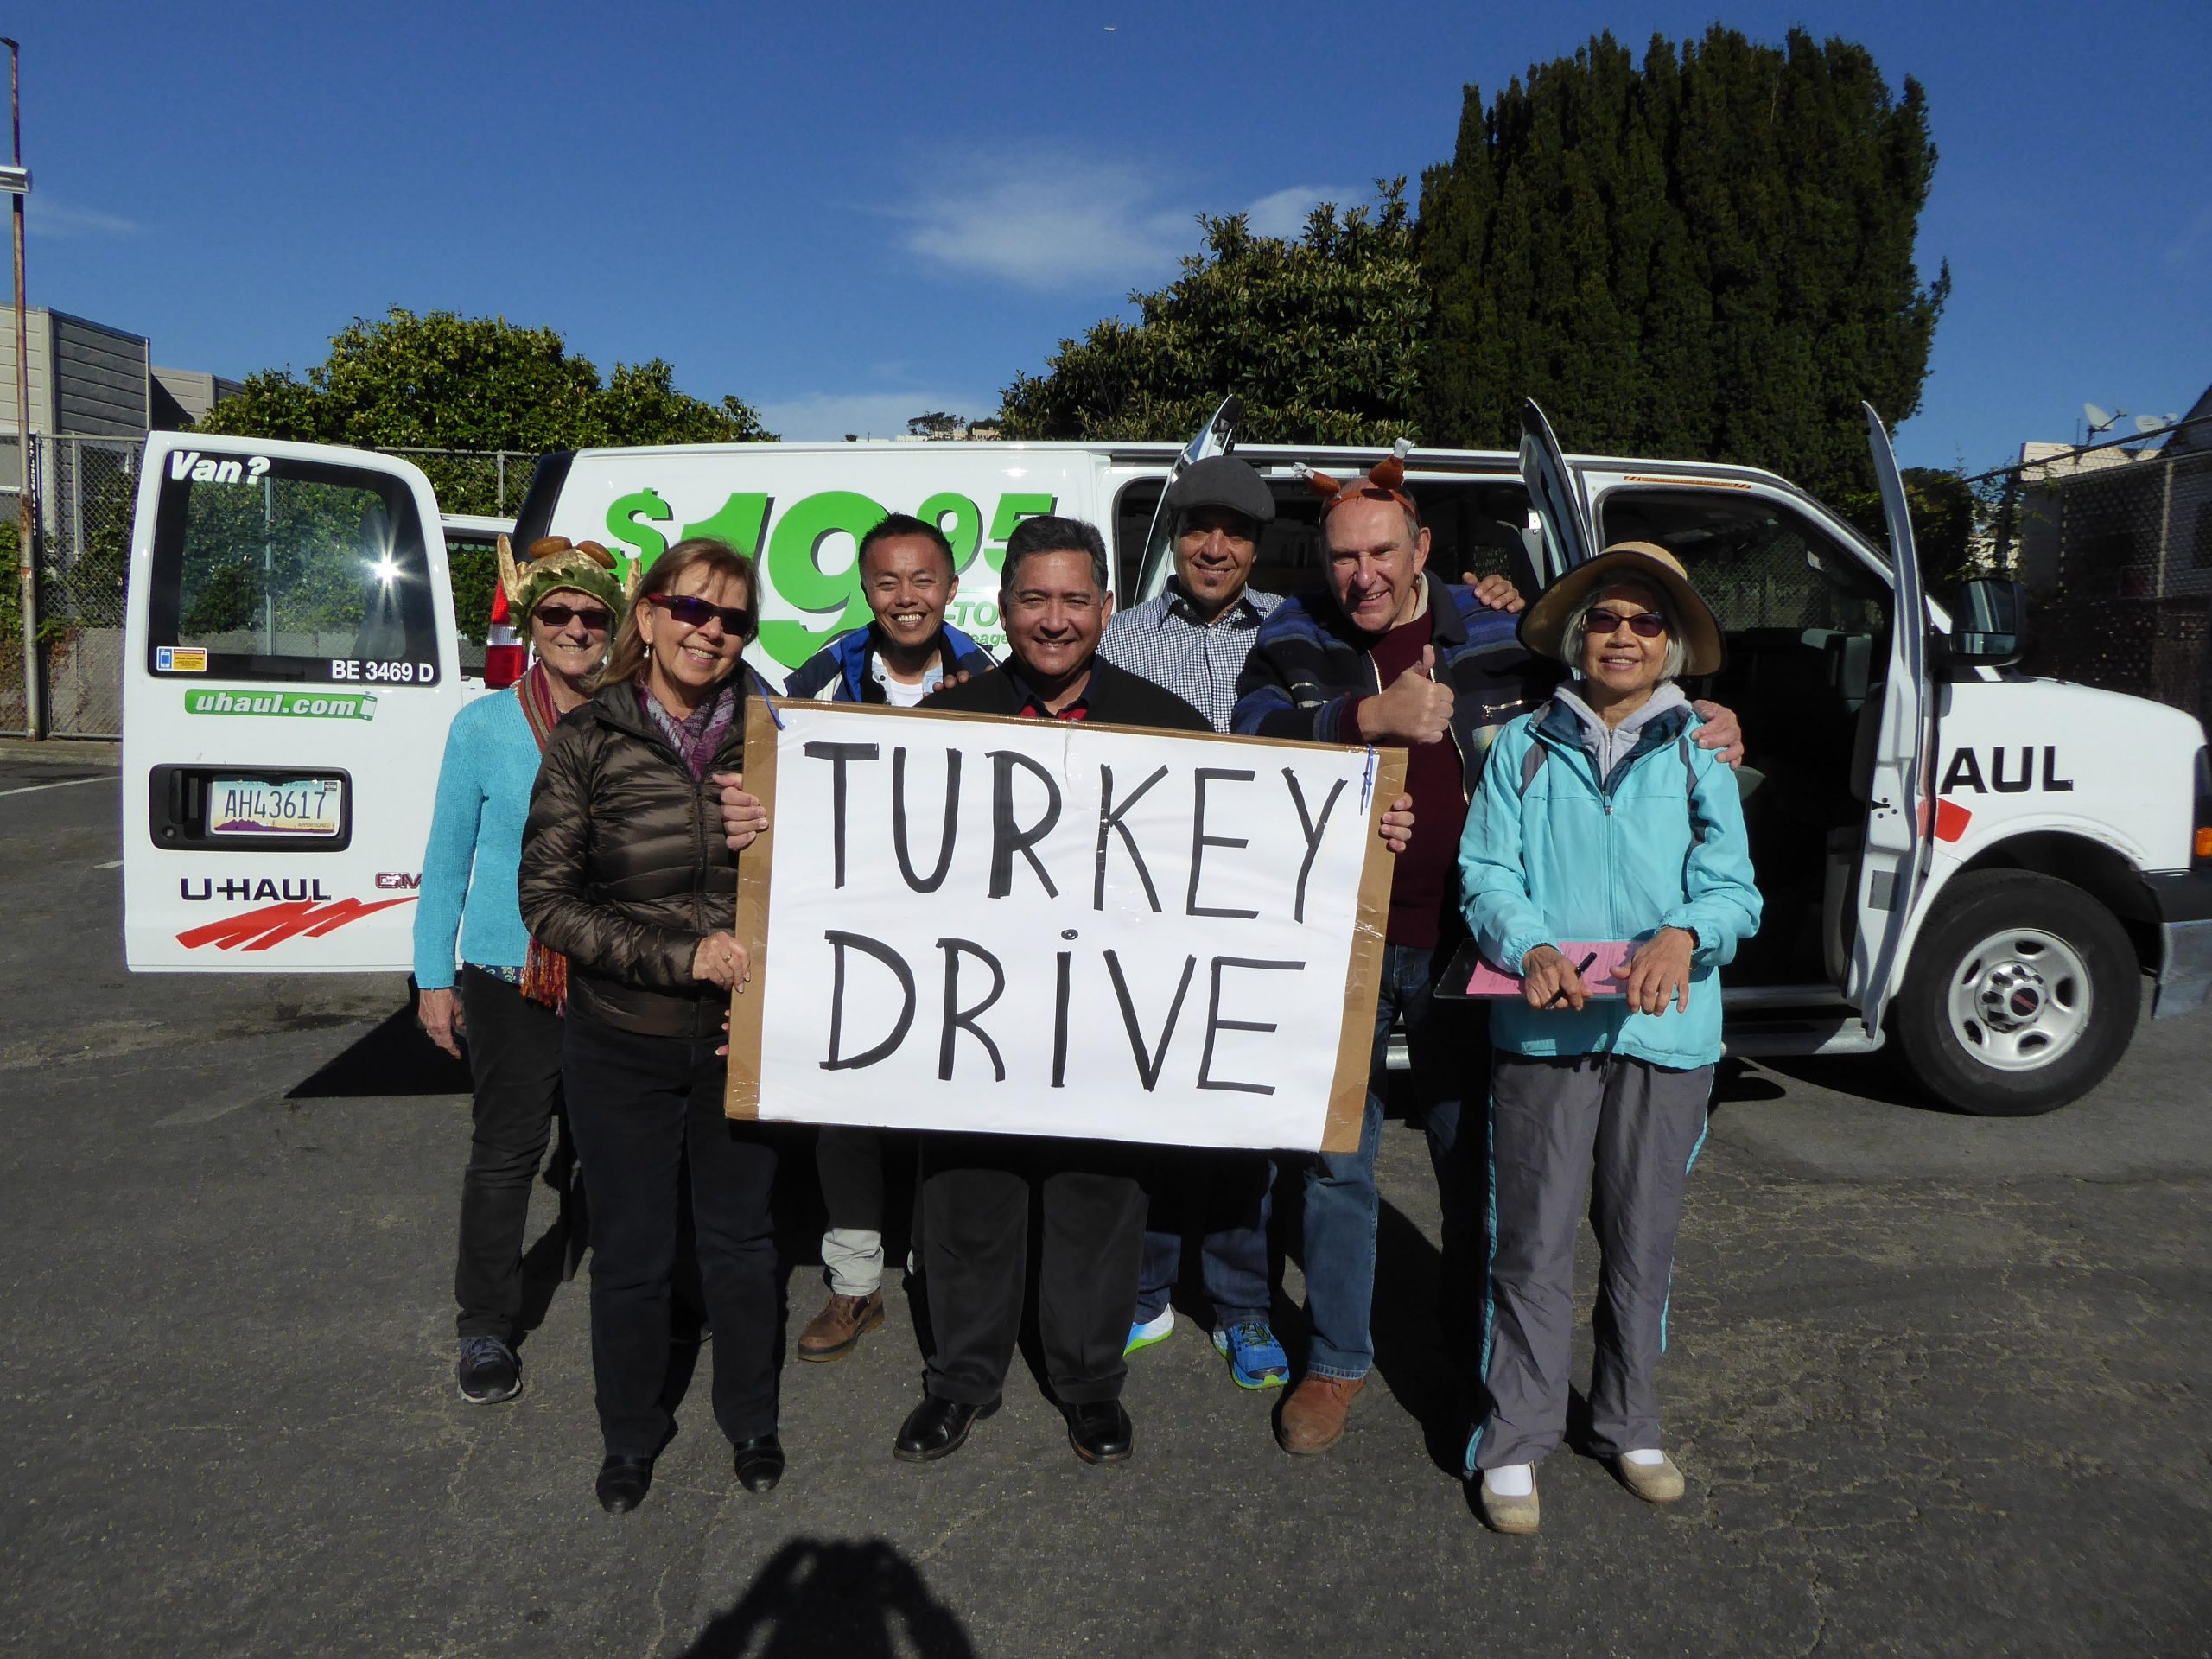 St. Emydius Parishioners Annual Turkey Drive Attracts Supporters Nationwide